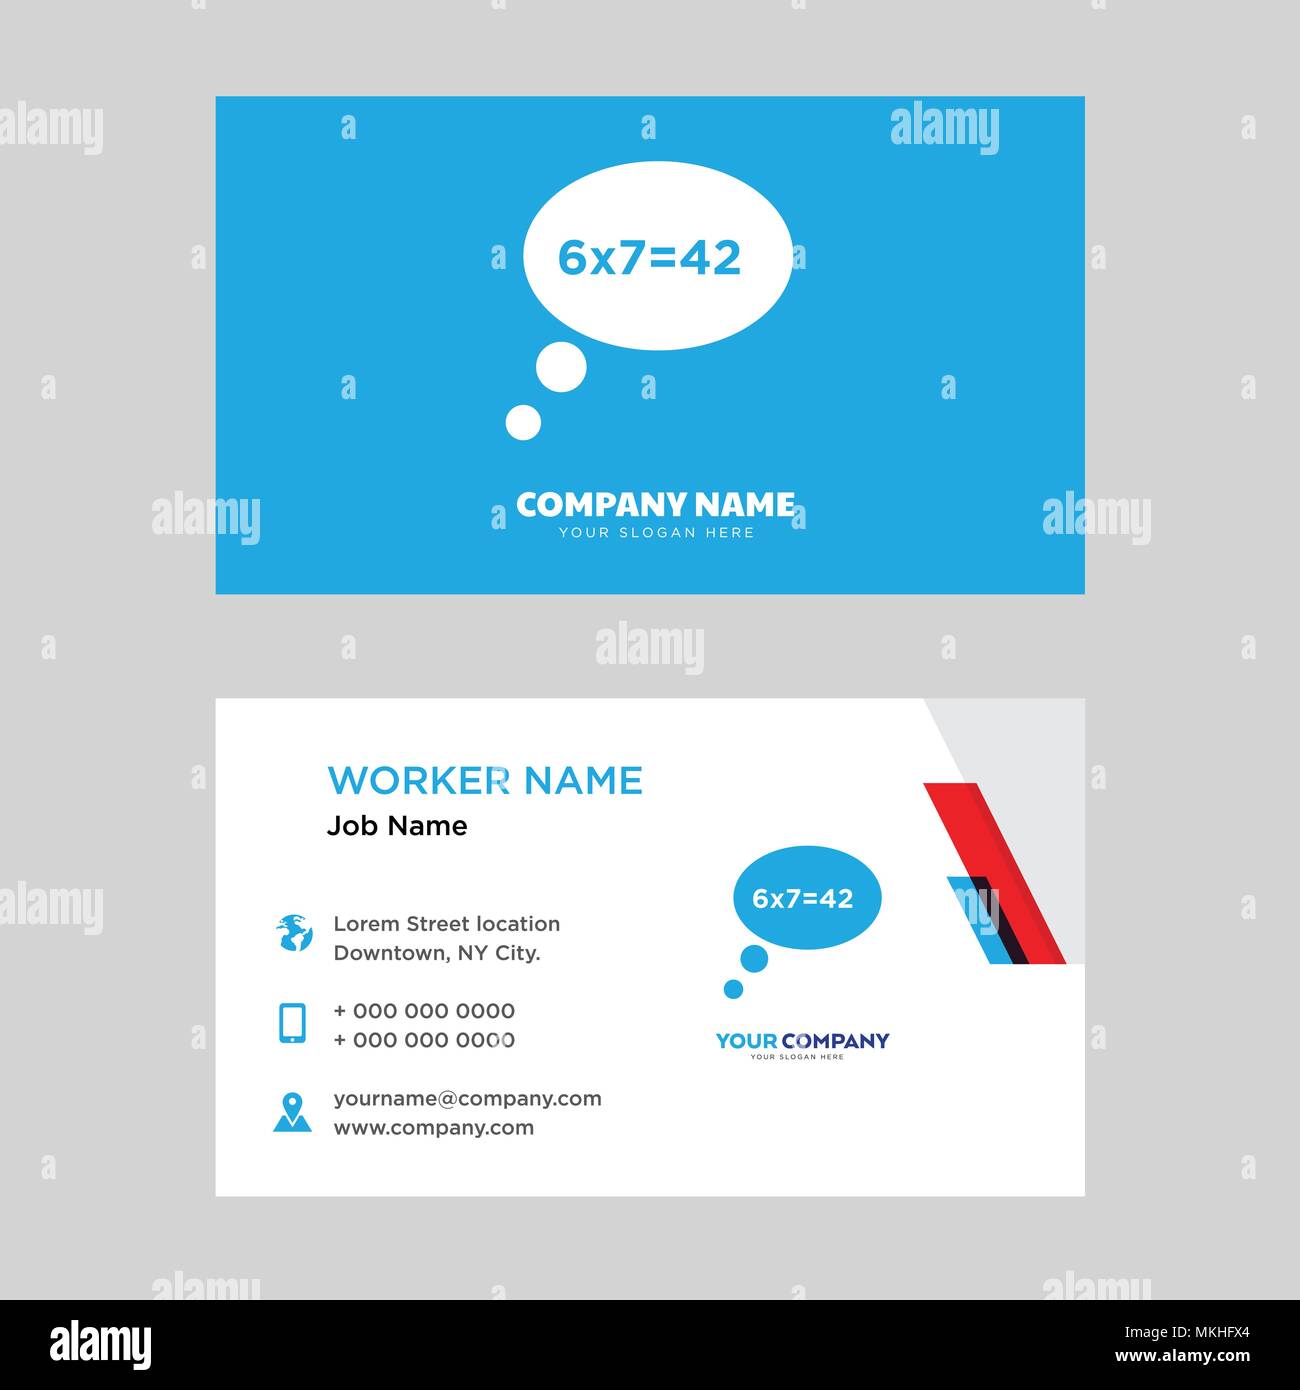 Speech Bubble Business Card Design Template Visiting For Your